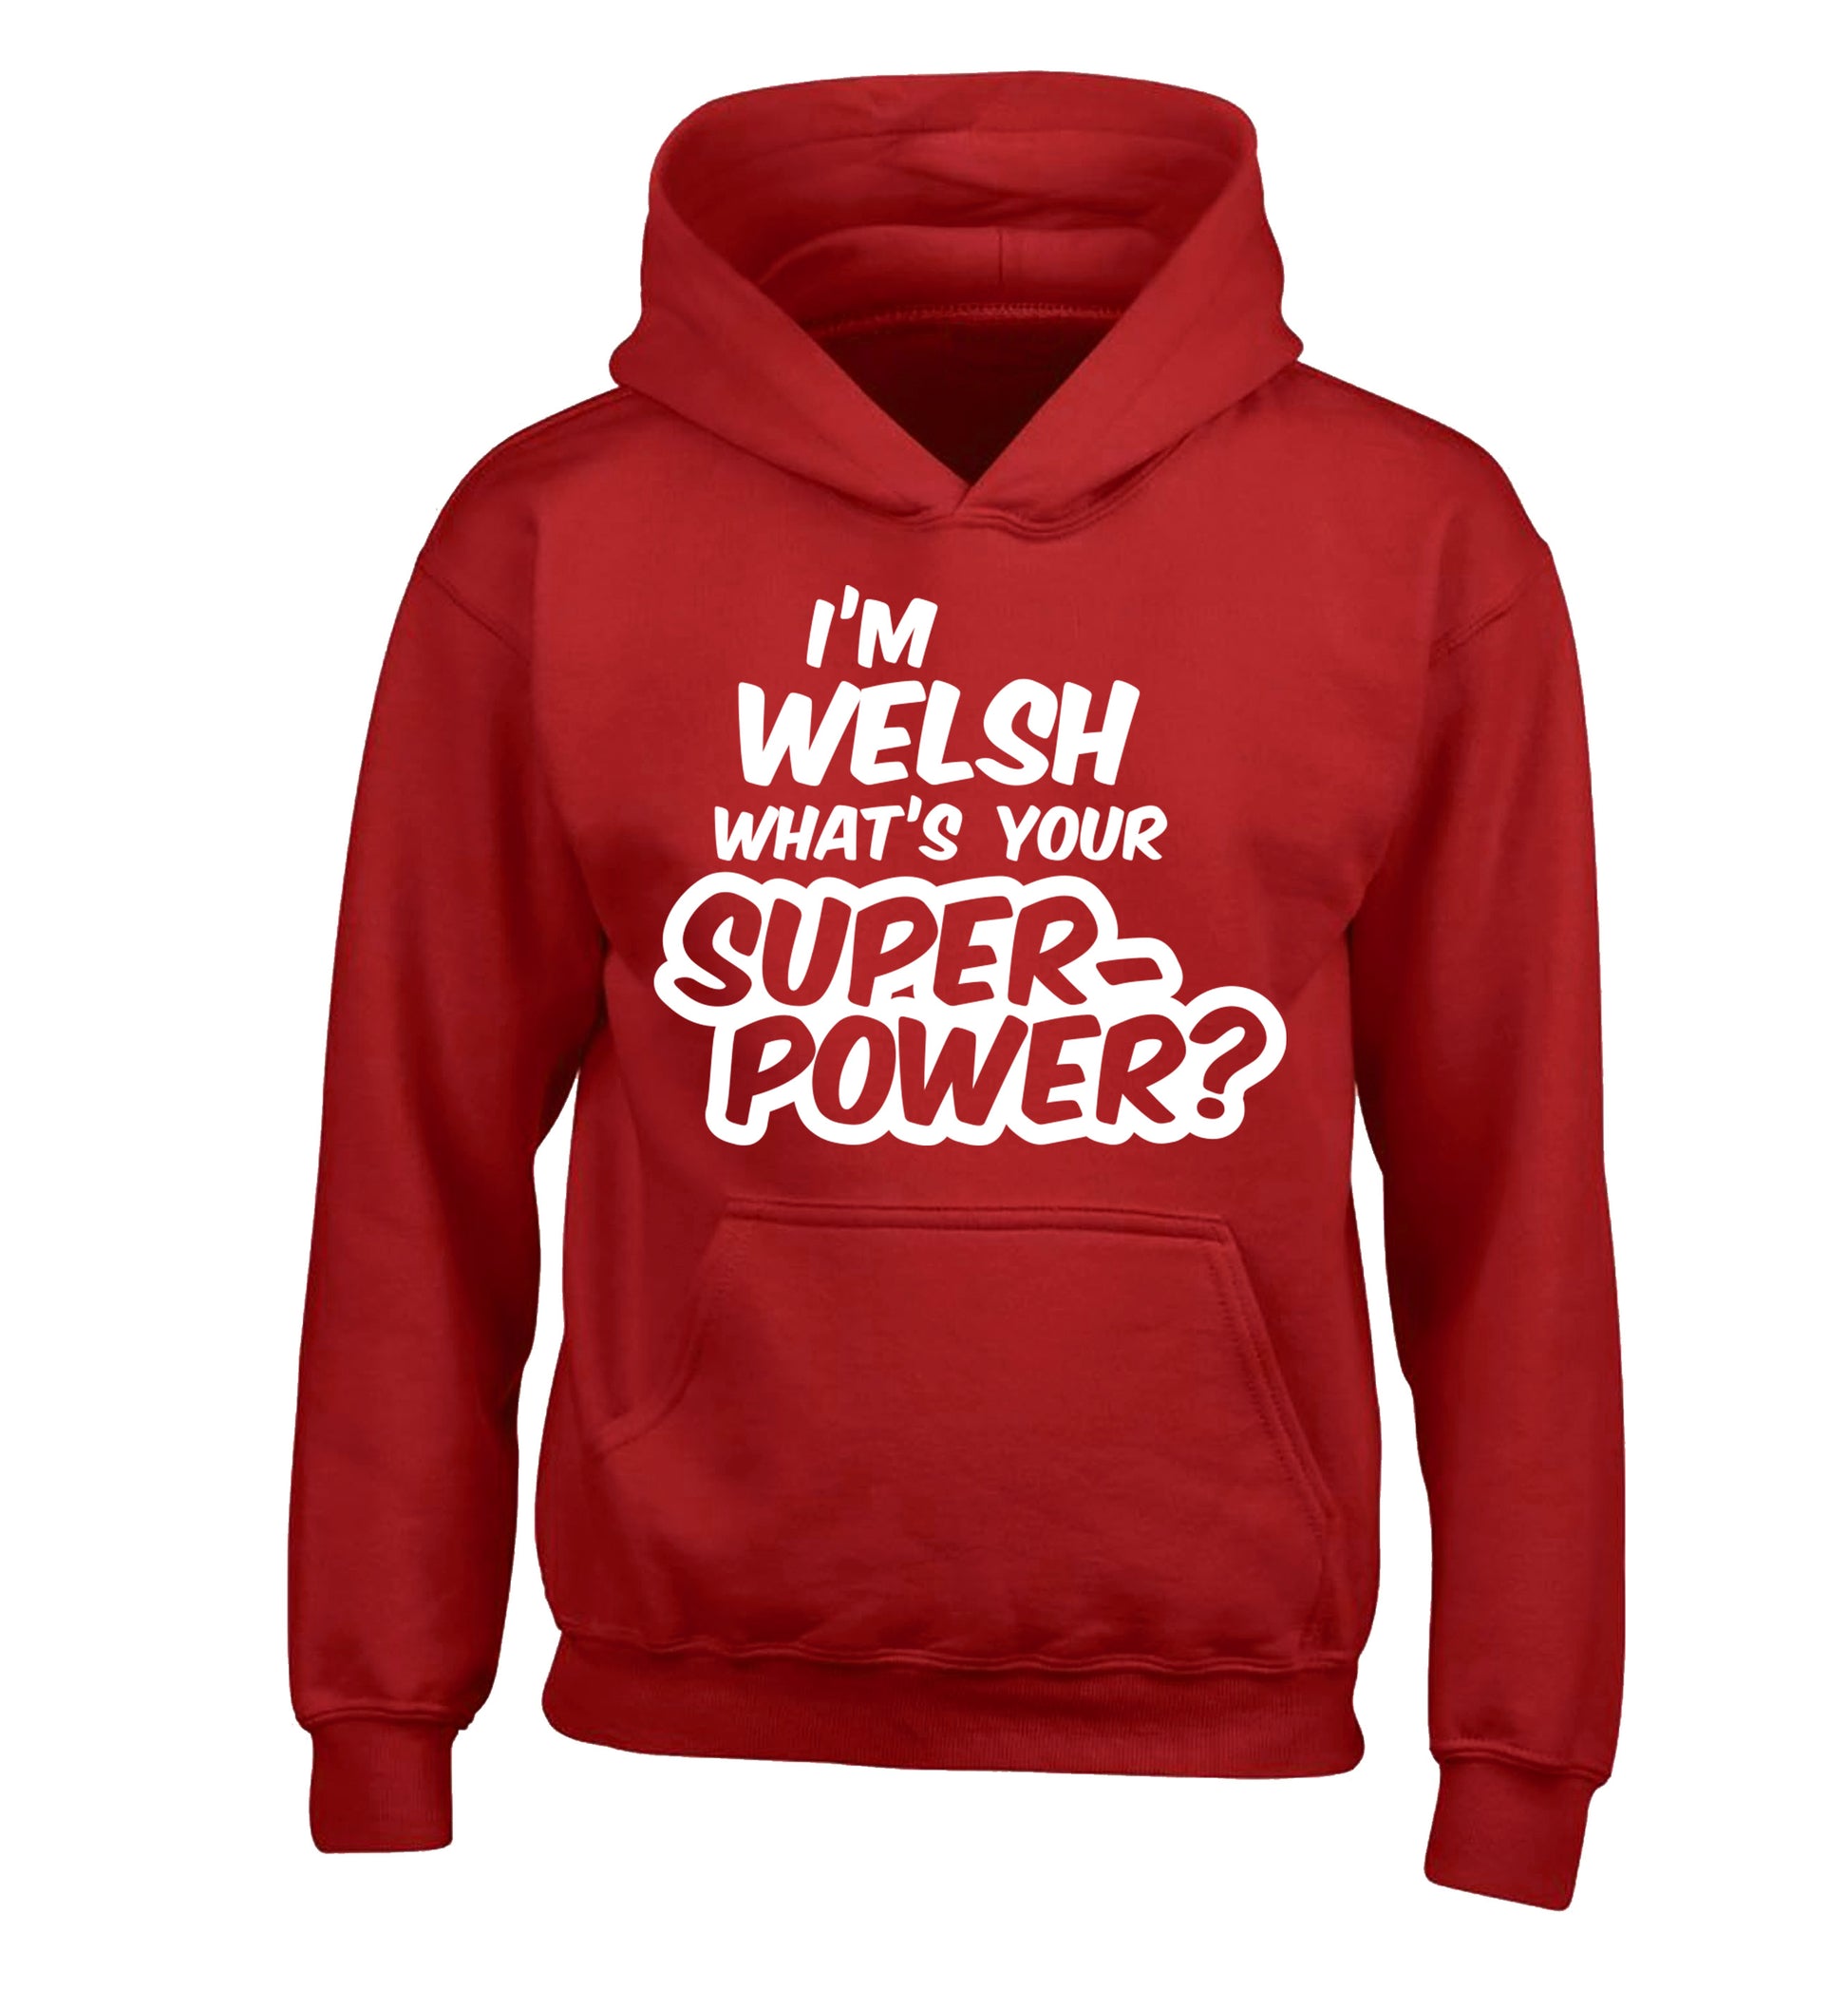 I'm Welsh what's your superpower? children's red hoodie 12-13 Years